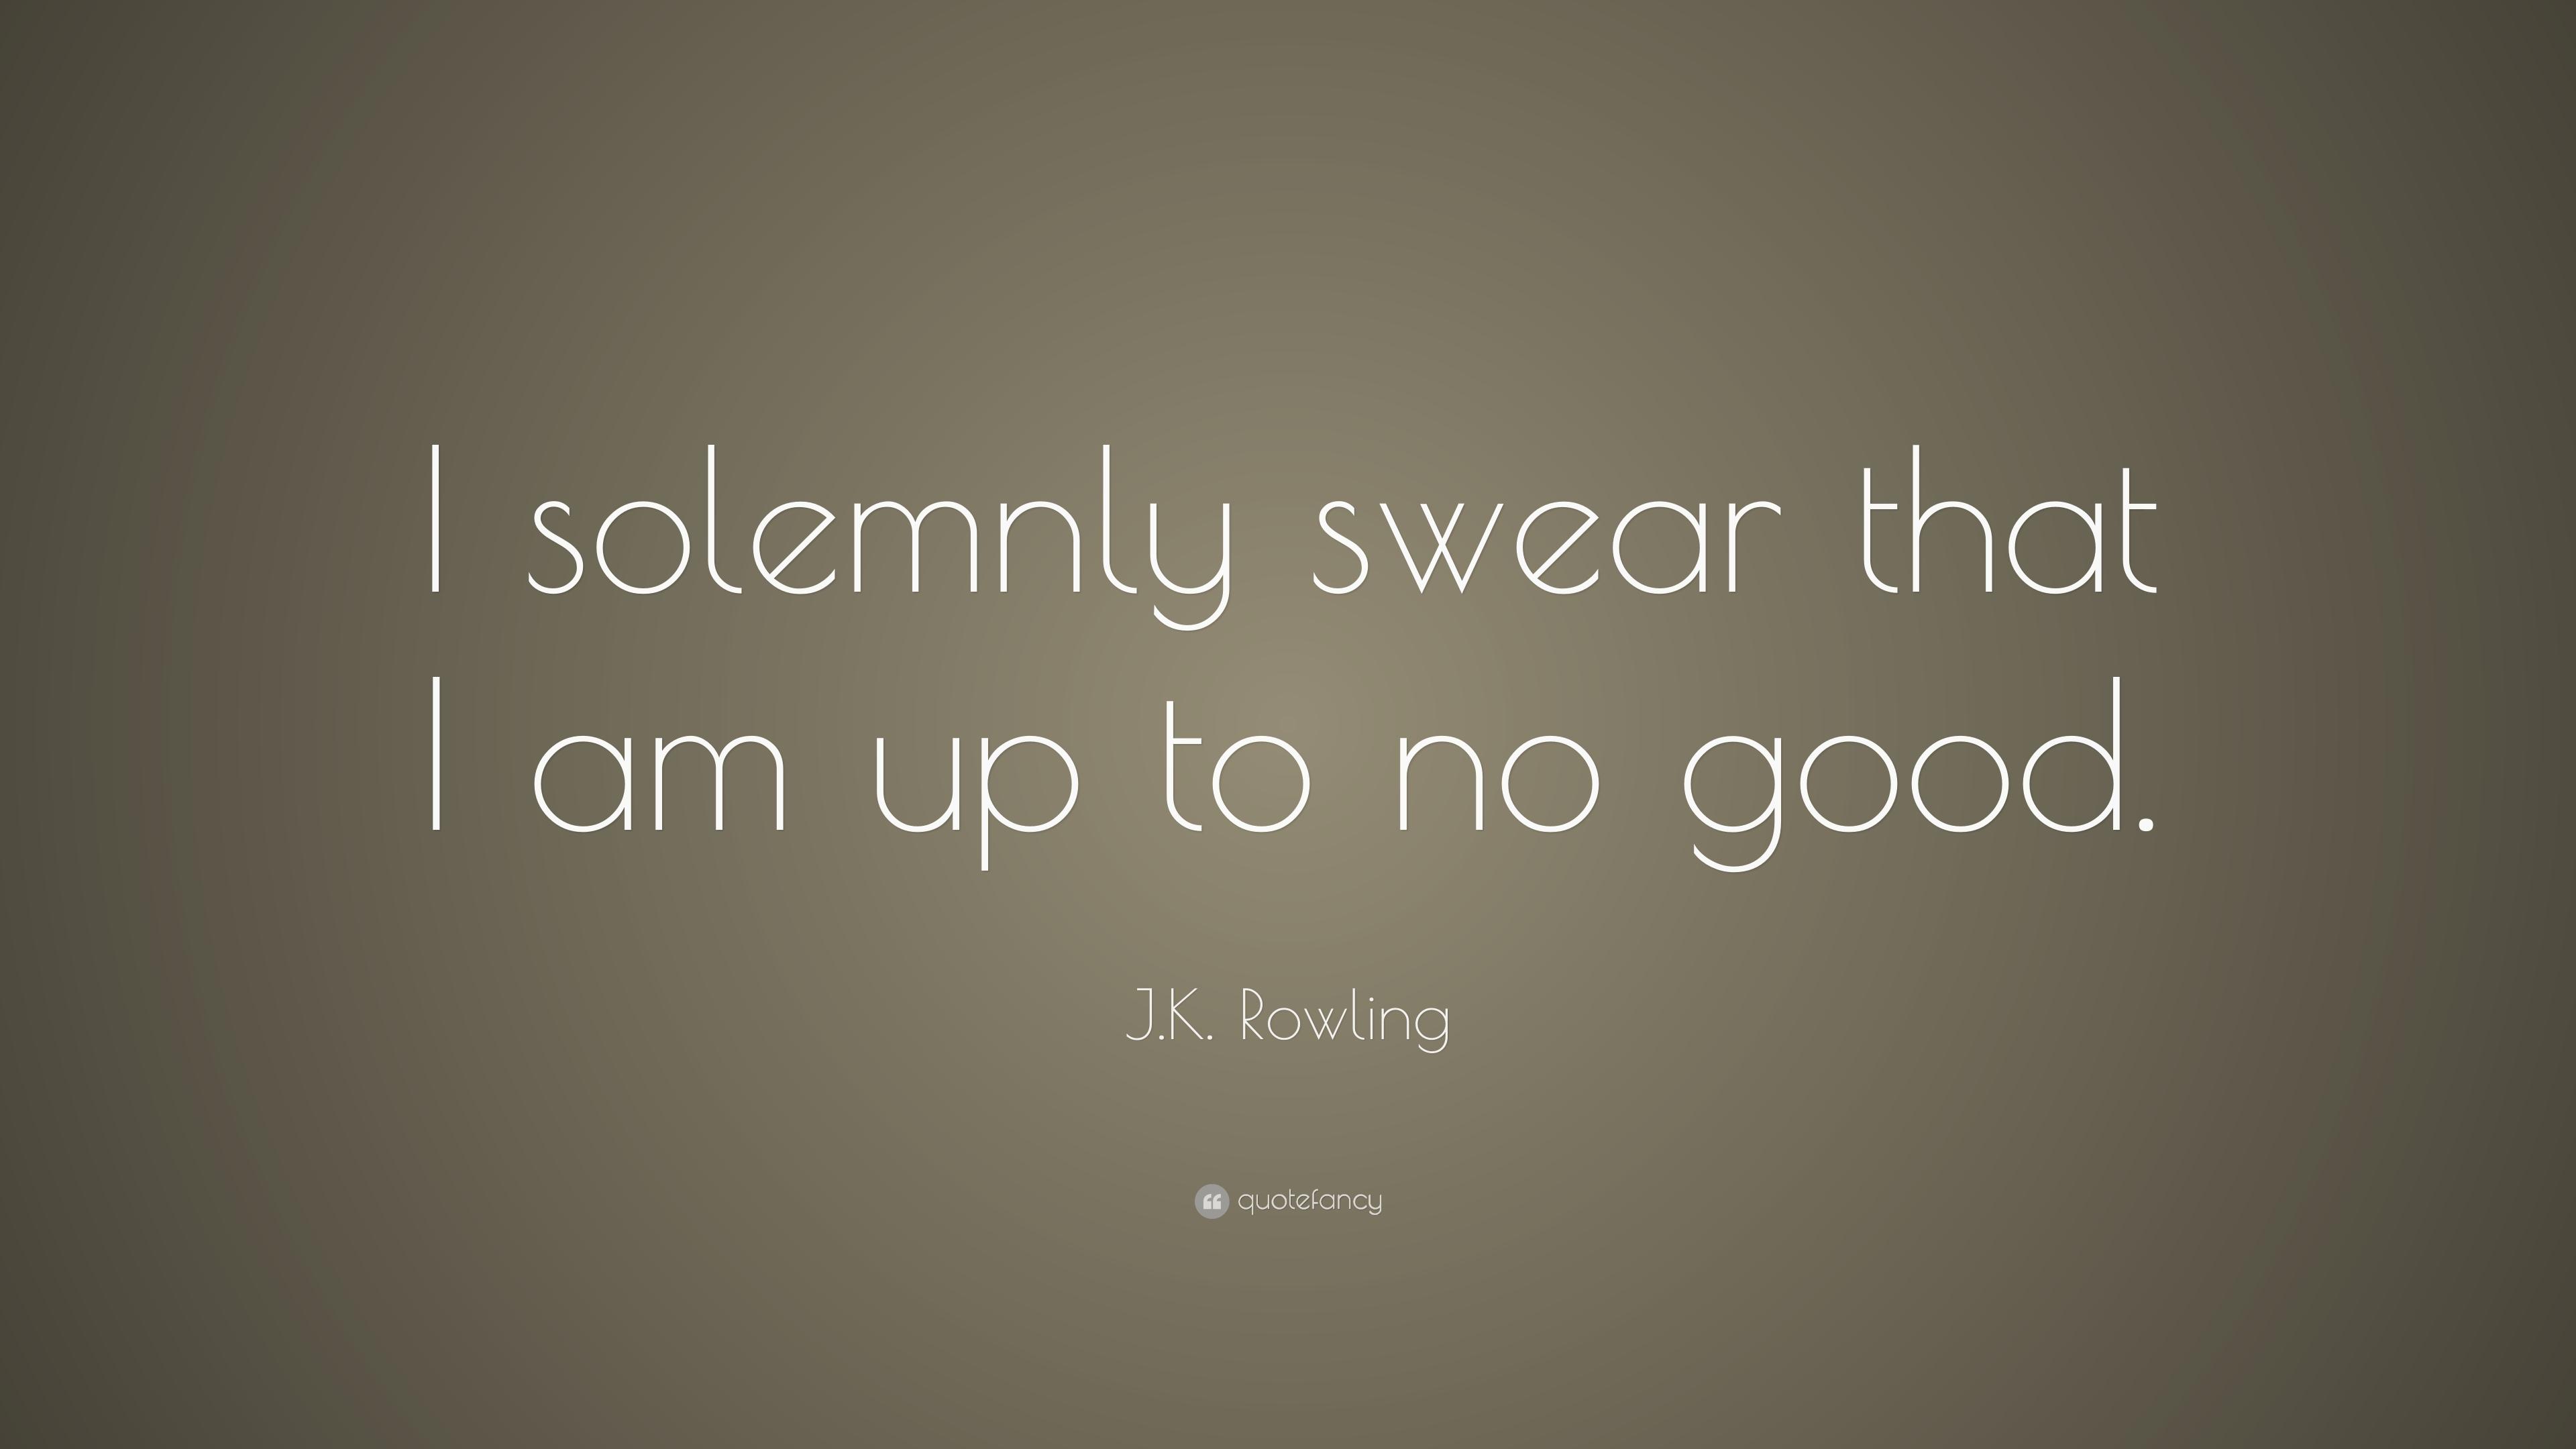 J.K. Rowling Quote: “I solemnly swear that I am up to no